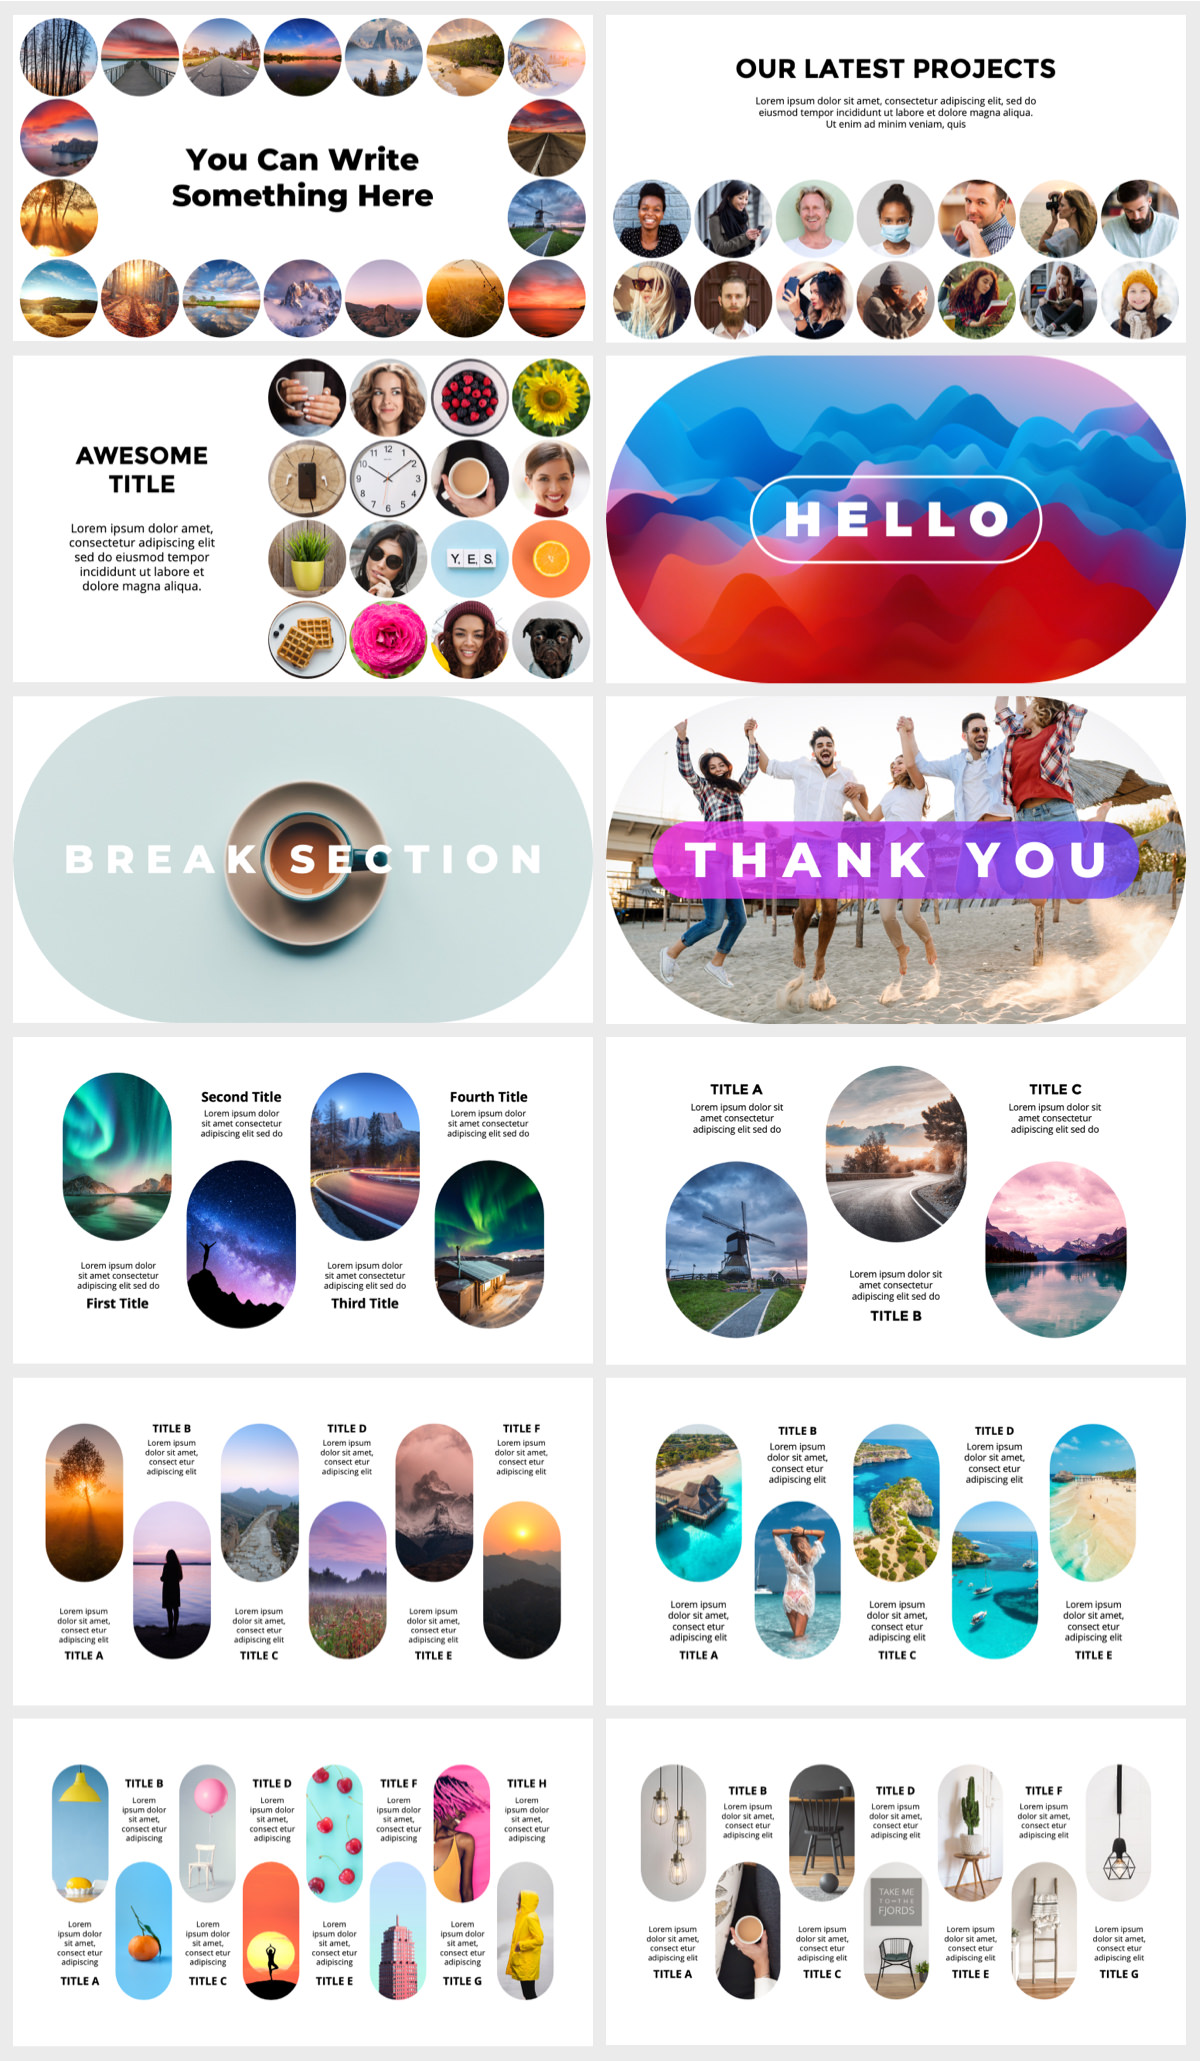 Wowly - 3500 Infographics & Presentation Templates! Updated! PowerPoint Canva Figma Sketch Ai Psd. - 260